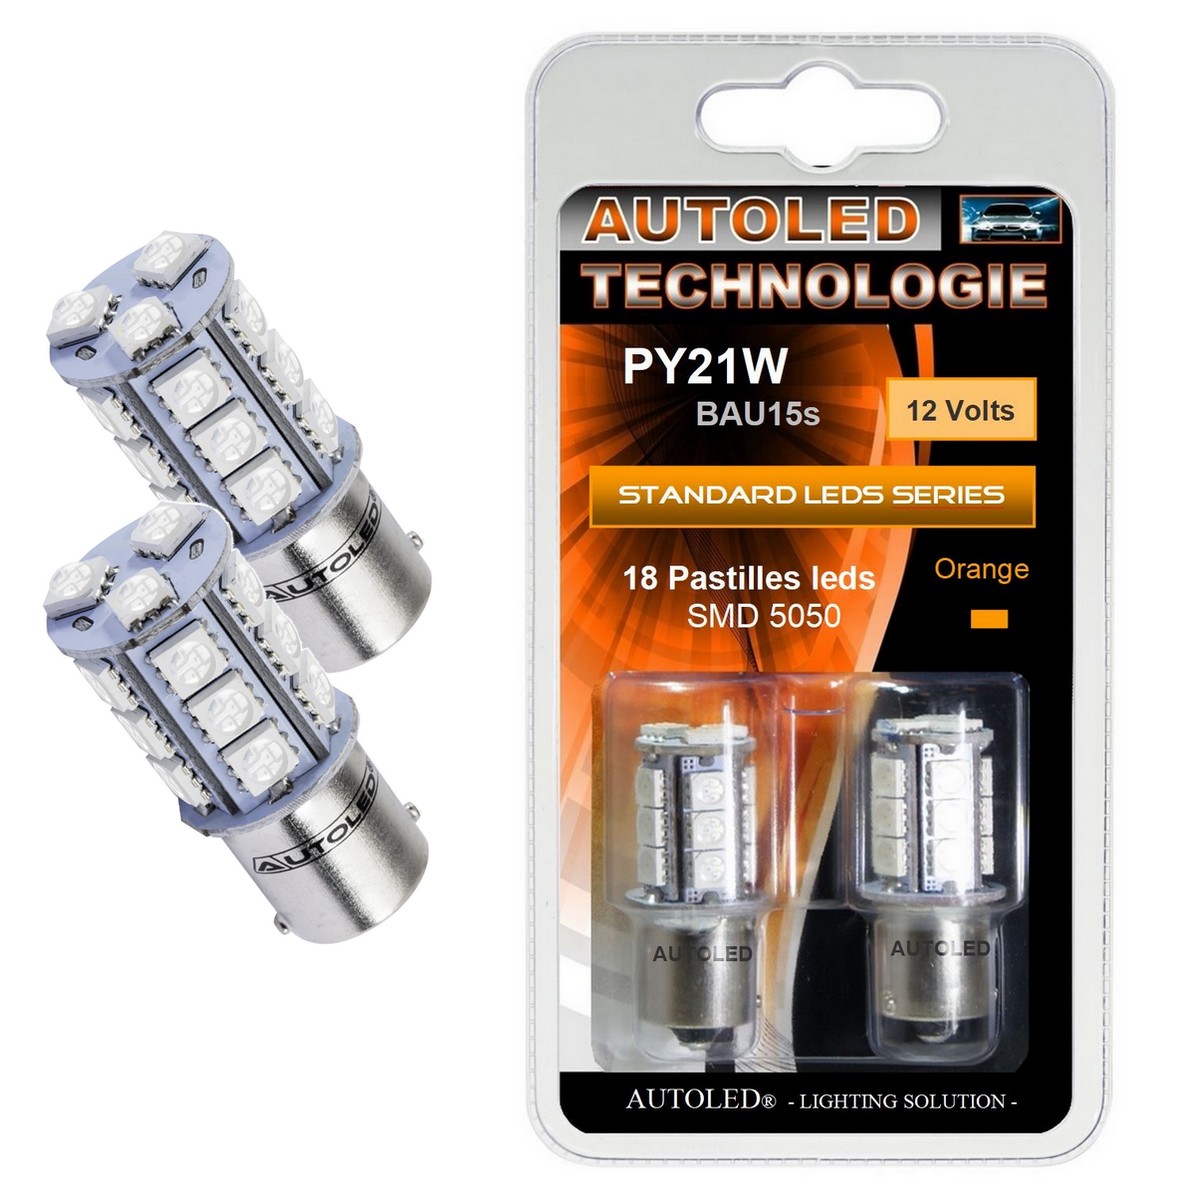 2 CABLE BOITIER ANTI ERREUR PLUG AND PLAY P21W POUR AMPOULE LED P21W / 1156  - ADTUNING FRANCE